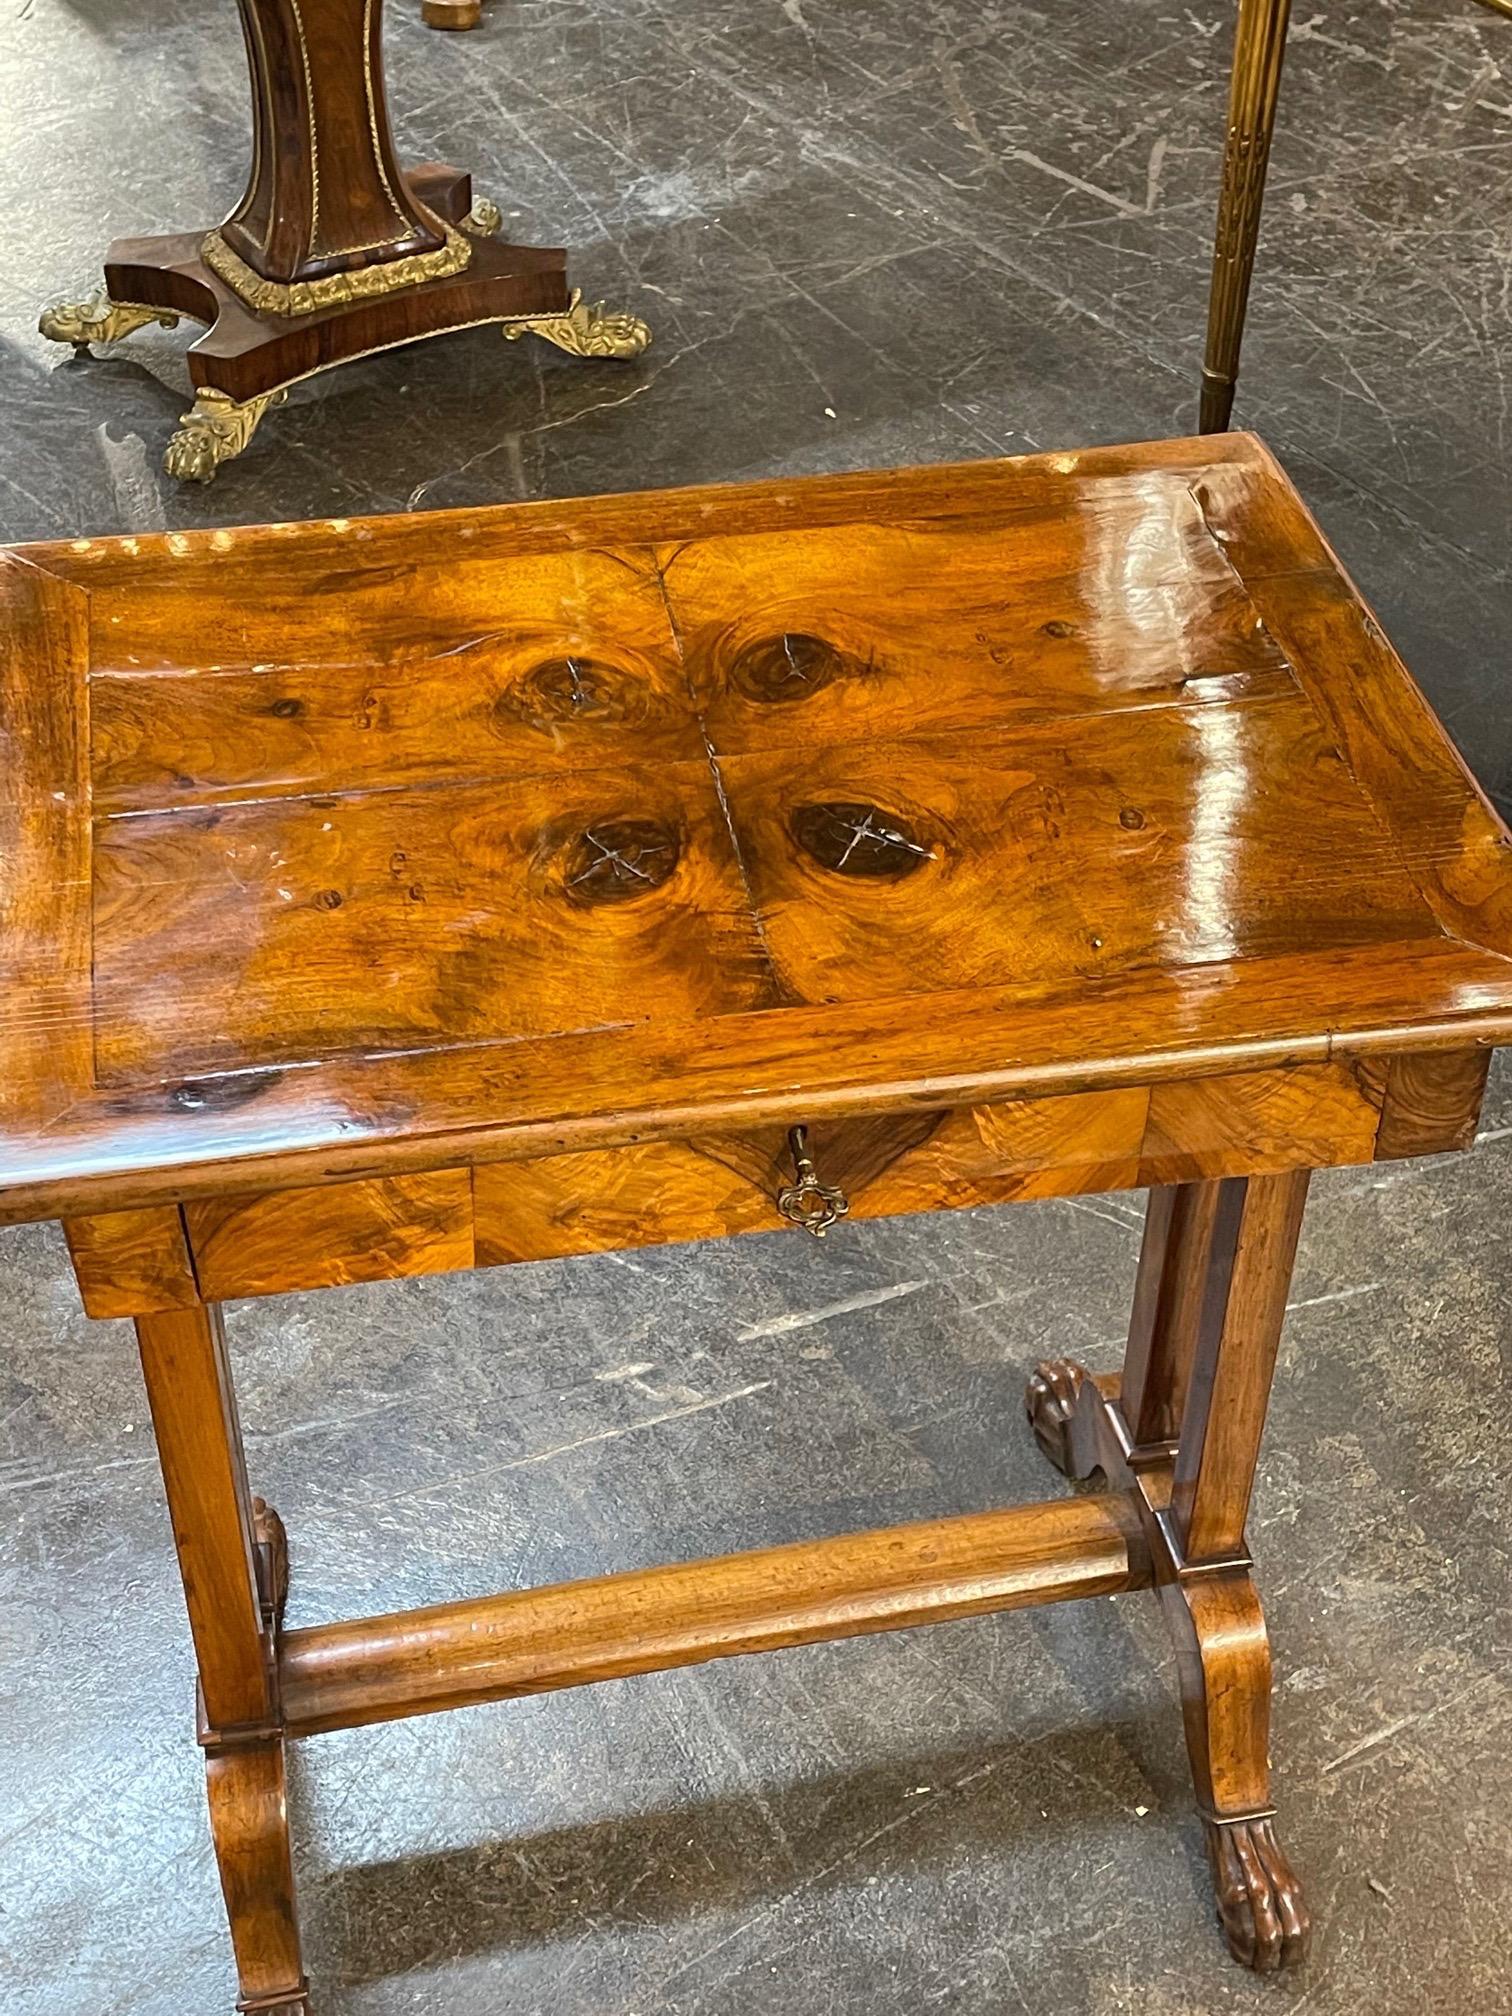 Beautiful 19th century Italian walnut side table. The piece has a very fine finish and 1 drawer. An elegant addition!